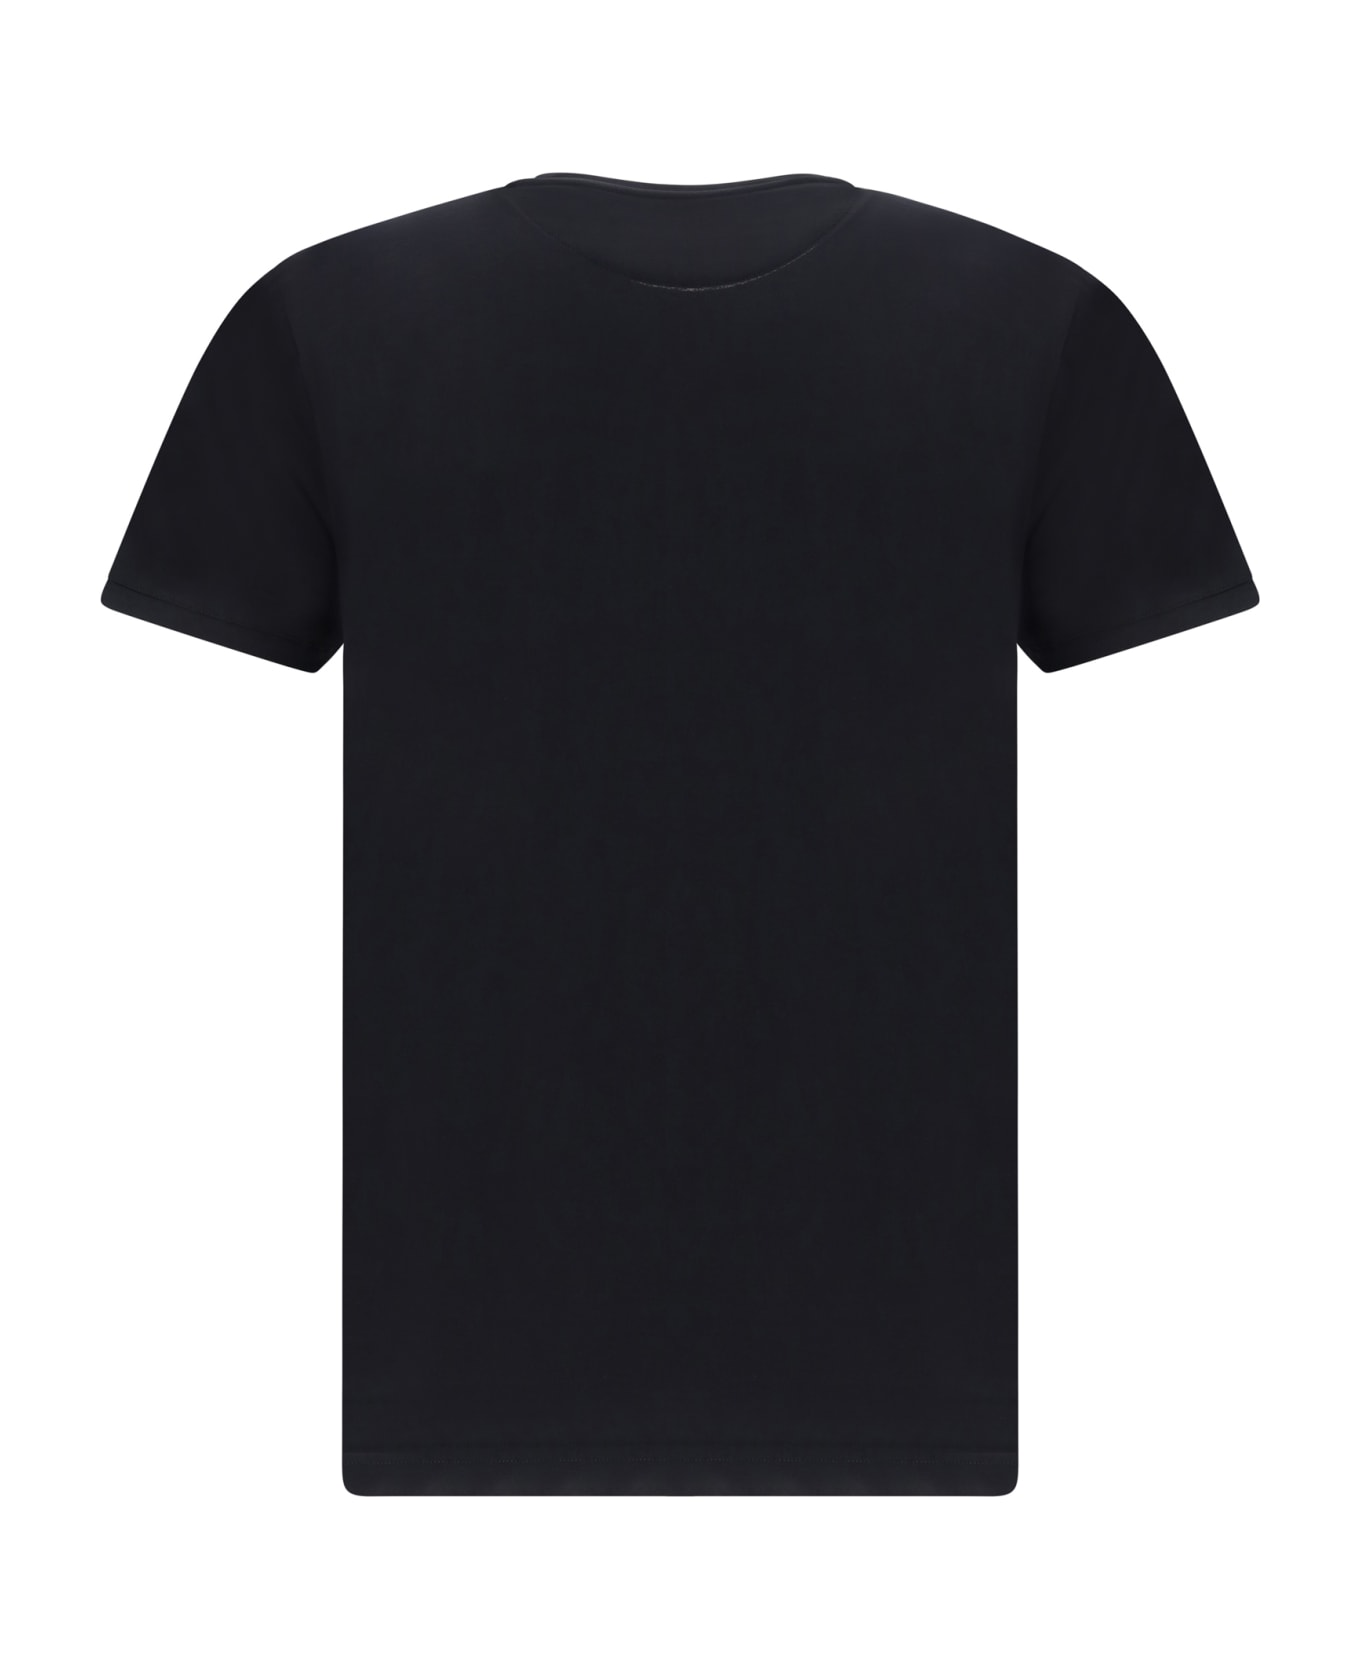 Fendi T-shirt With Leather Logo Patch - Nero シャツ